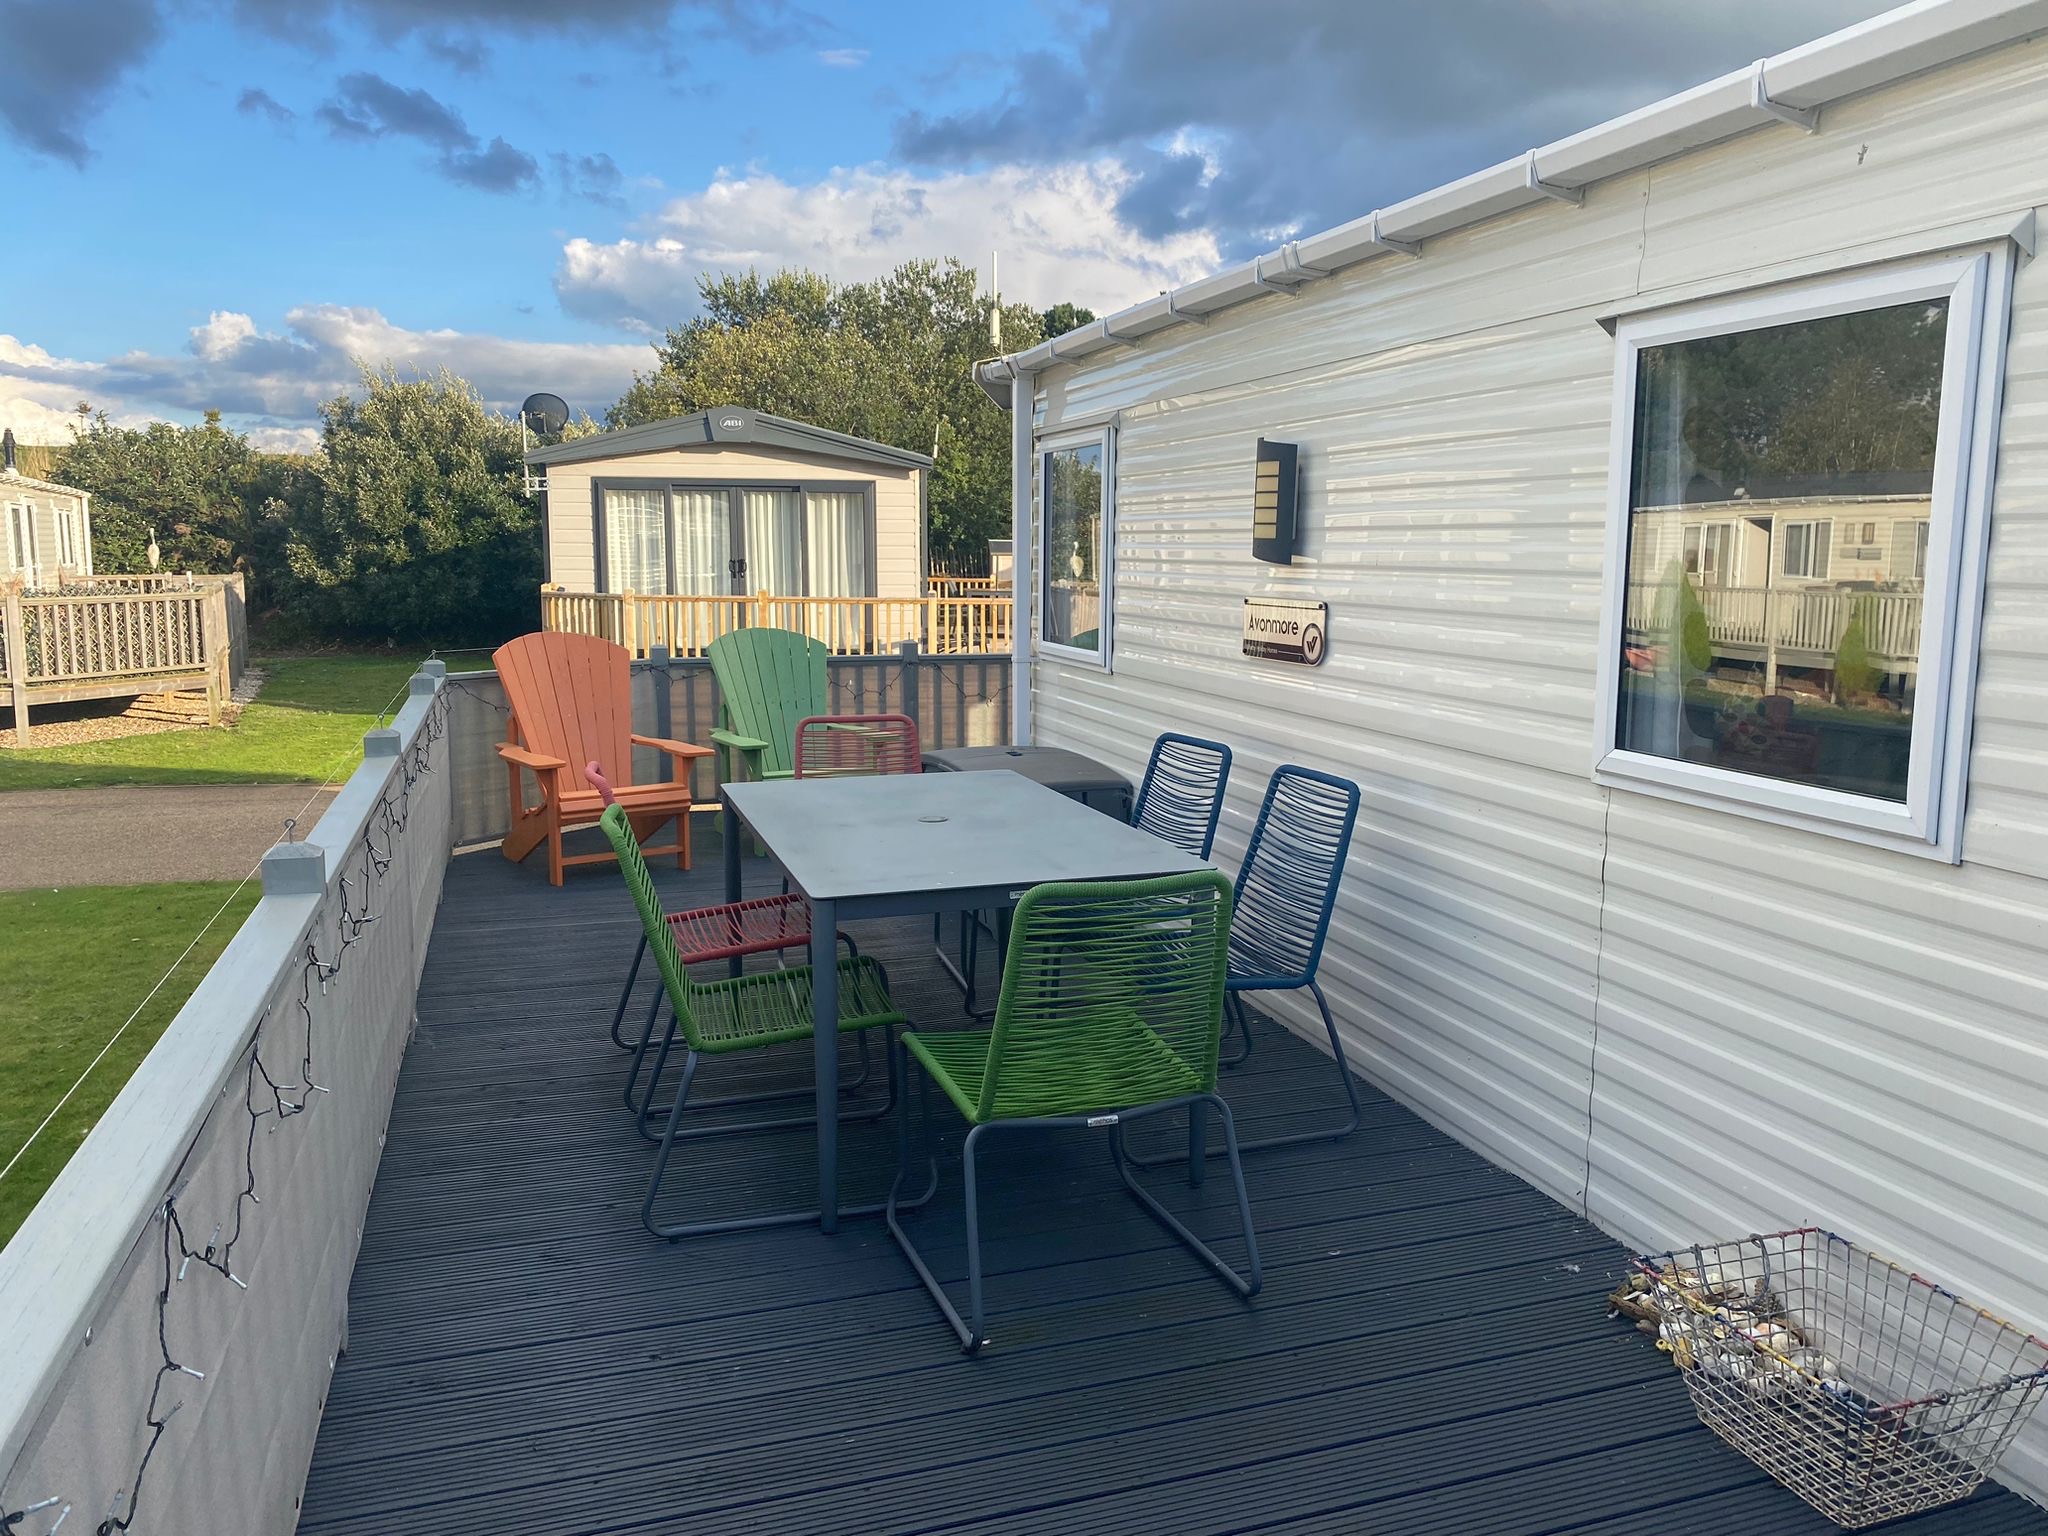 Image 2 of 2-bedroom-holiday-home-at-pinewoods-in-wells-next-the-sea-norfolk